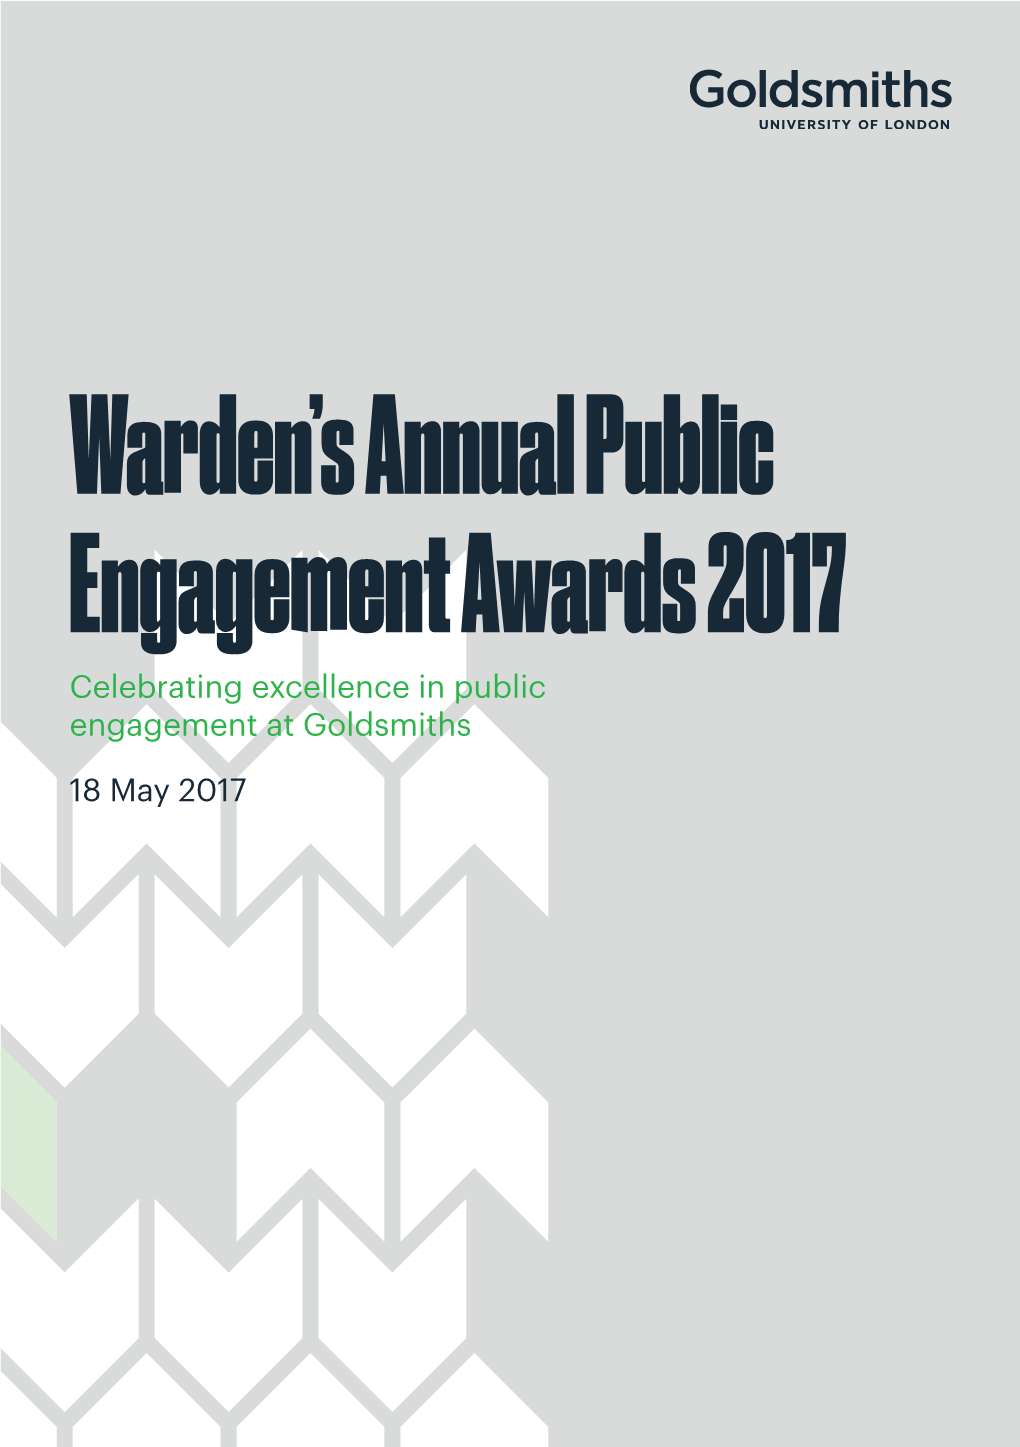 Warden's Annual Public Engagement Awards 2017